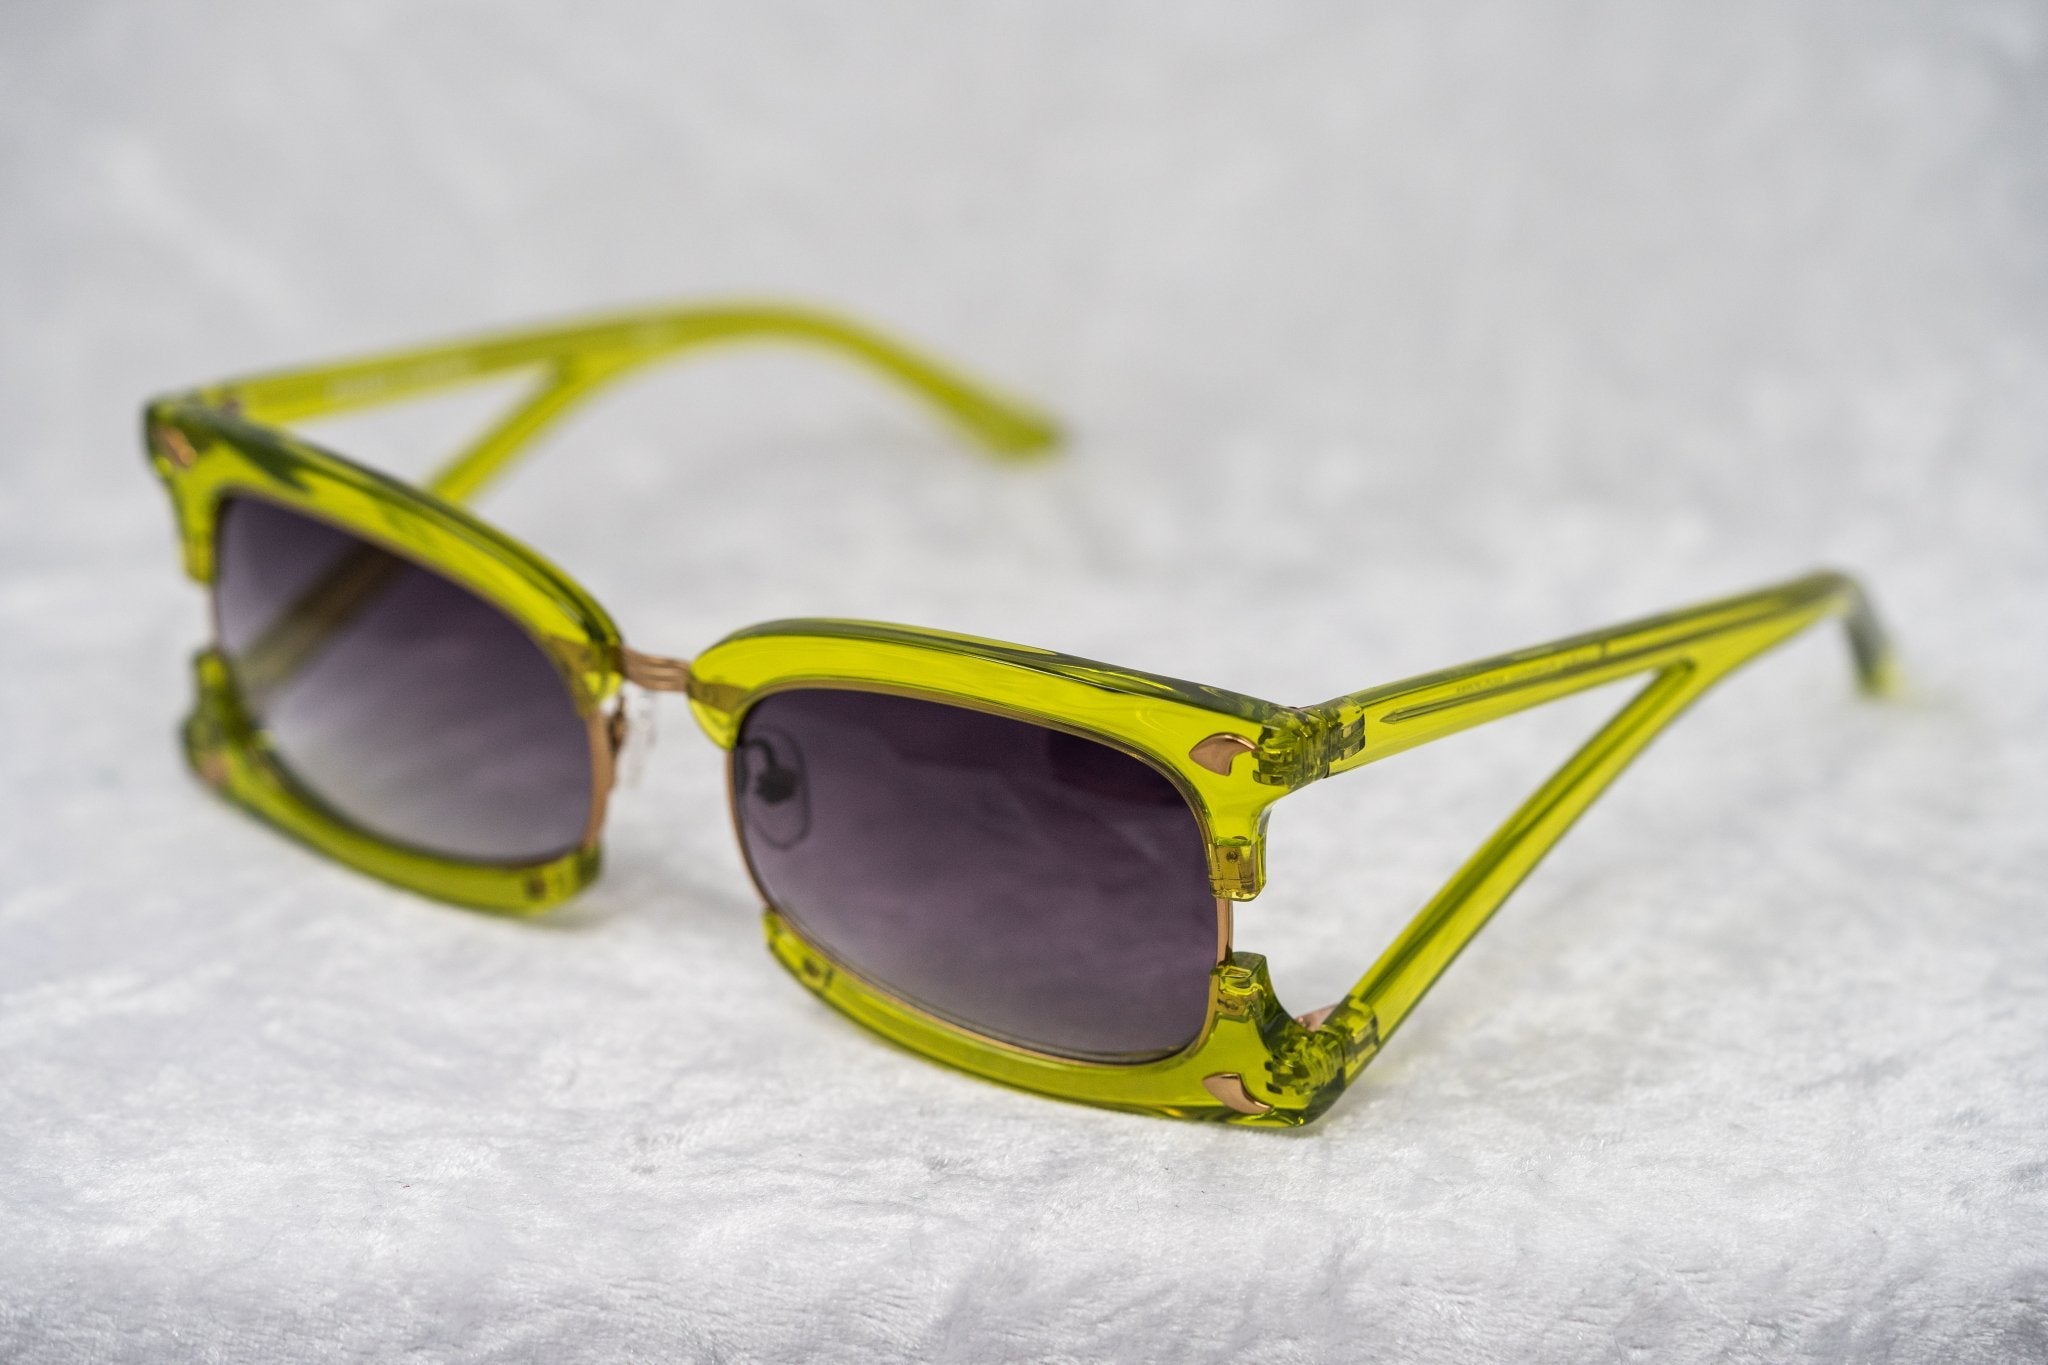 Prabal Gurung Sunglasses Rectangular Apple Green With Purple Category 3 Graduated Lenses PG2C4SUN - Watches & Crystals